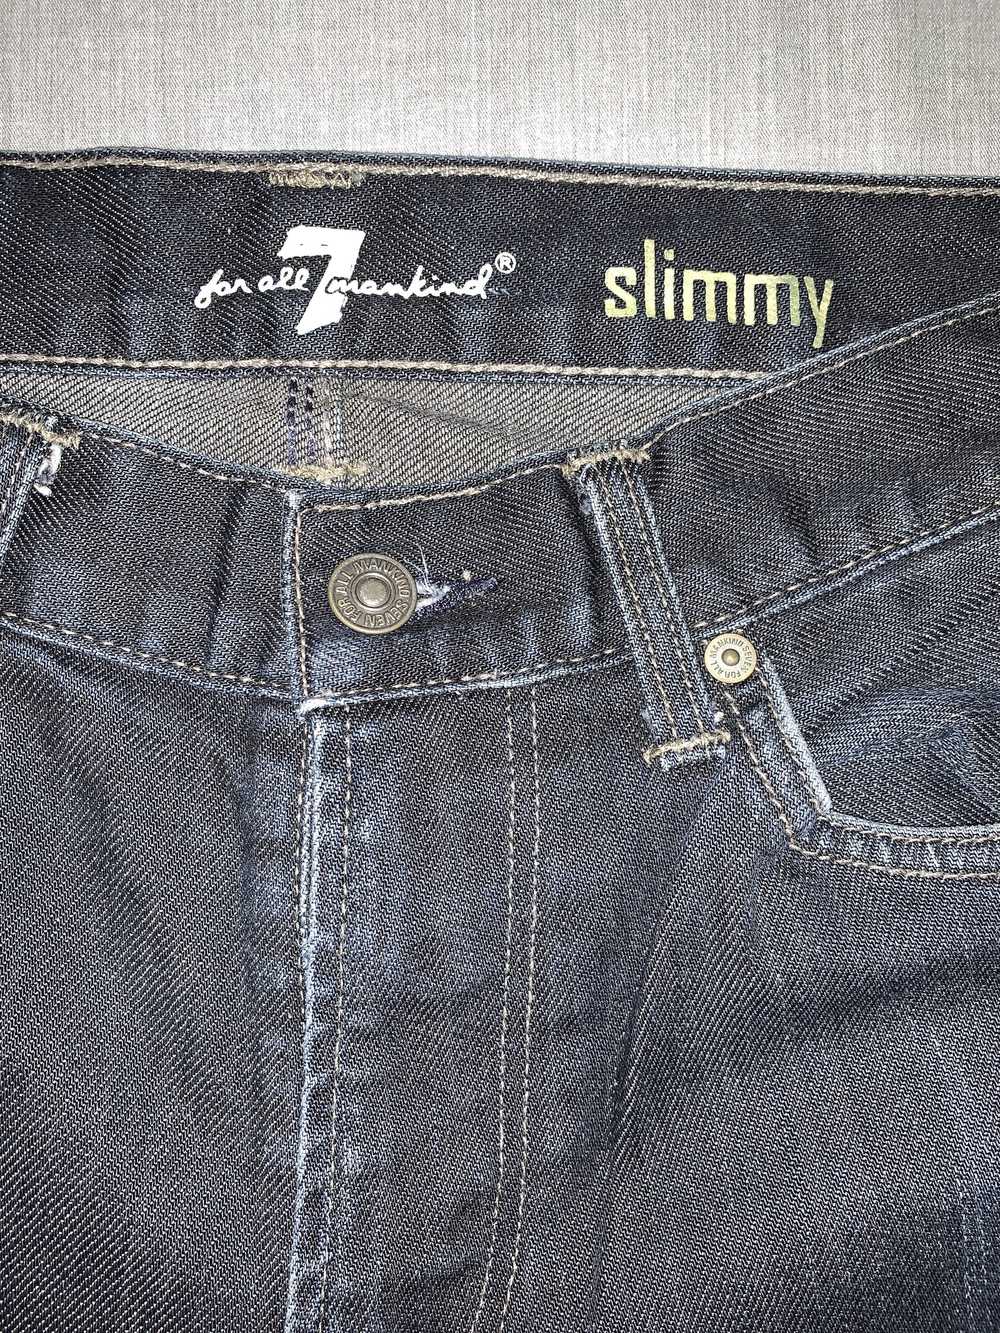 7 For All Mankind 7 for all mankind Slimmy Jeans - image 3